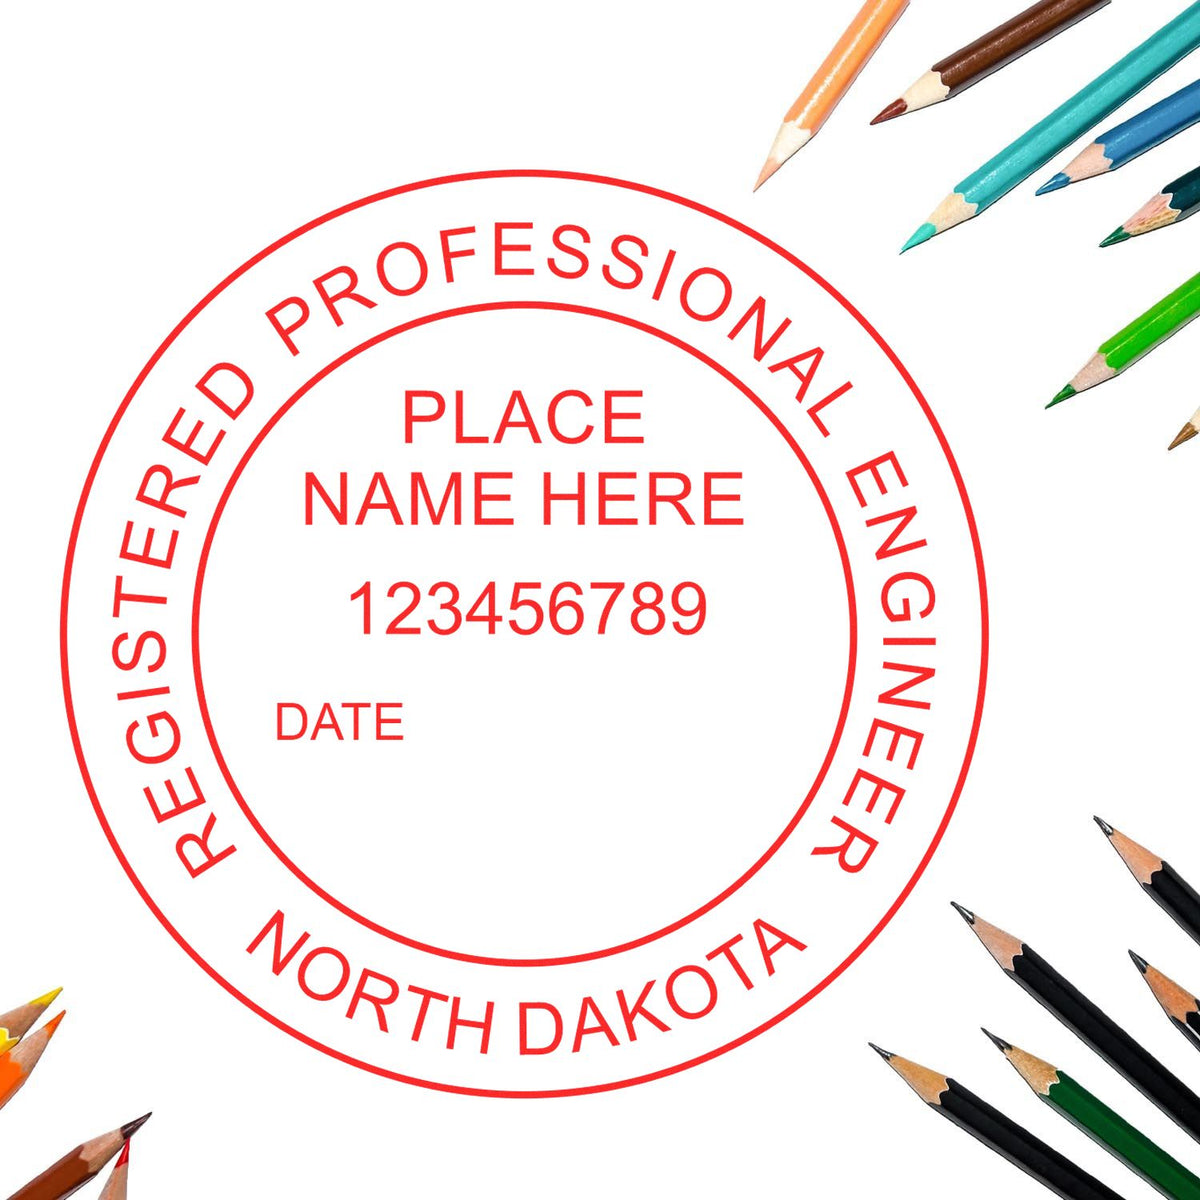 A lifestyle photo showing a stamped image of the North Dakota Professional Engineer Seal Stamp on a piece of paper